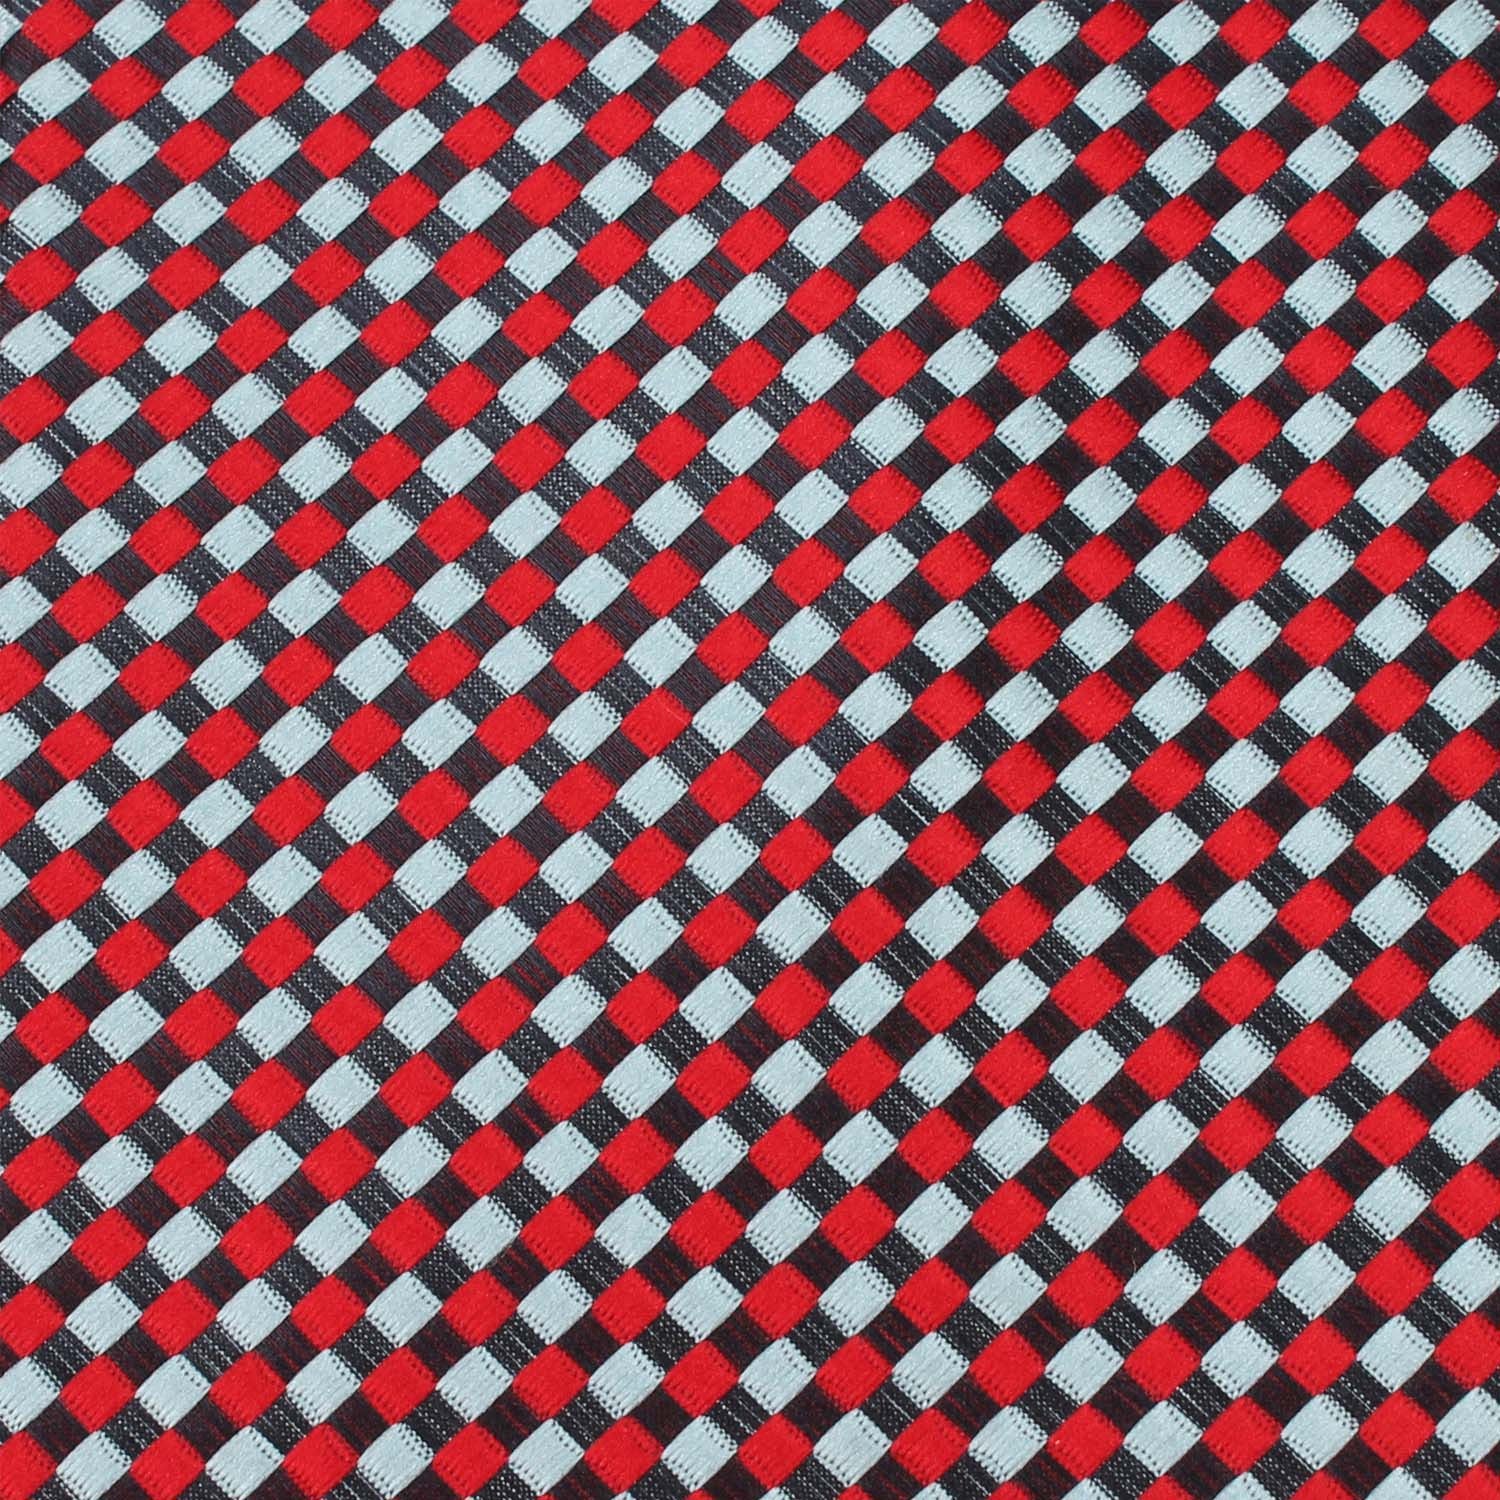 Navy and Light Blue Red Checkered Fabric Skinny Tie X283